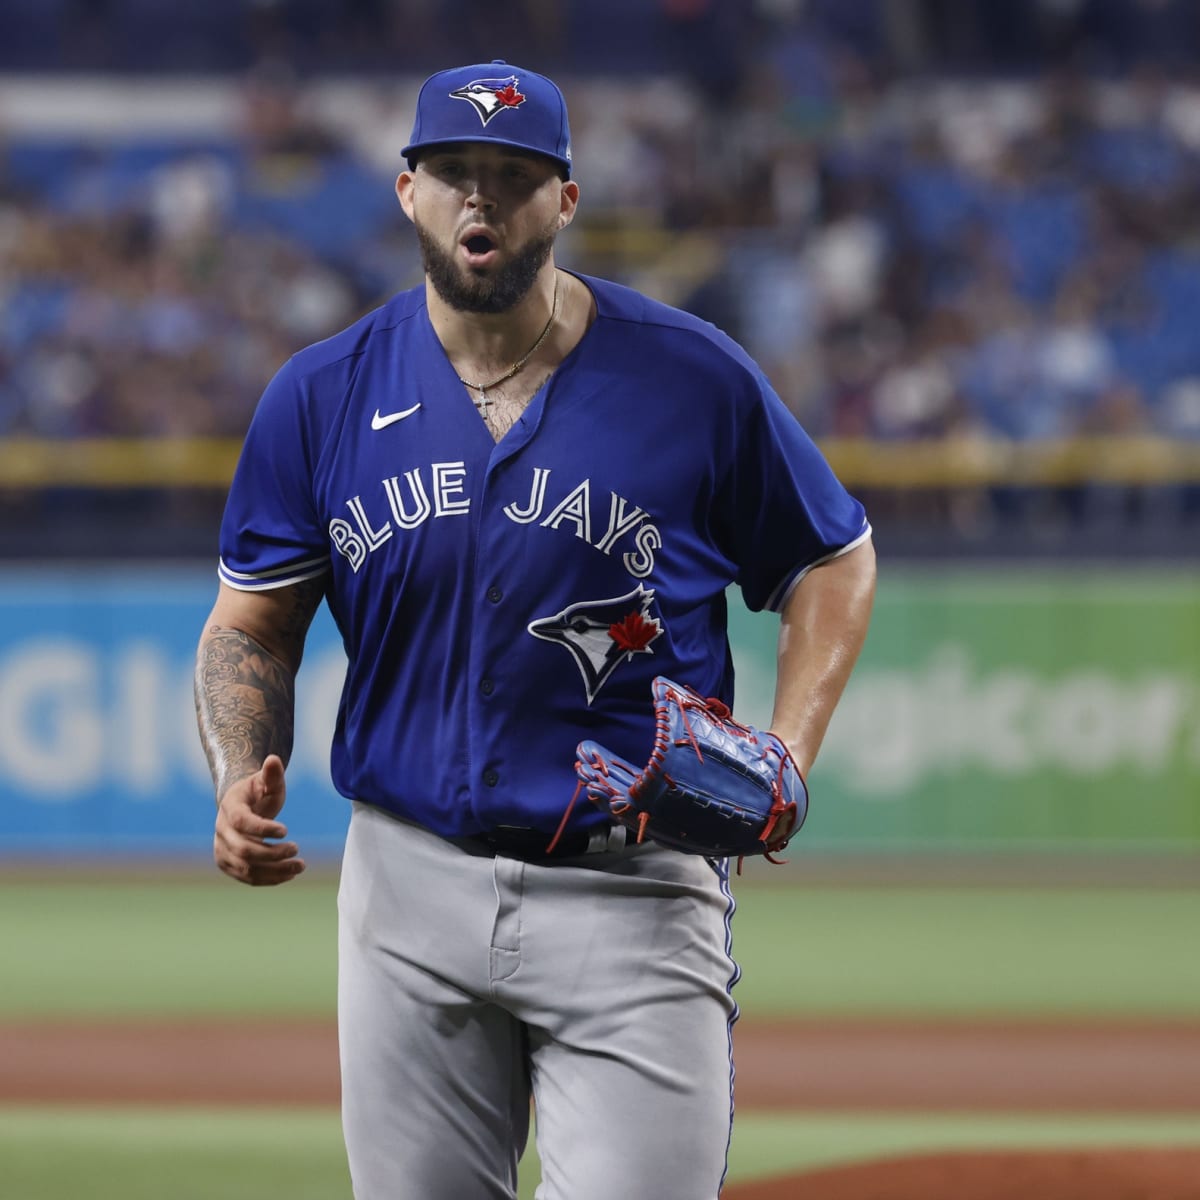 Rays take a step back with loss to Blue Jays